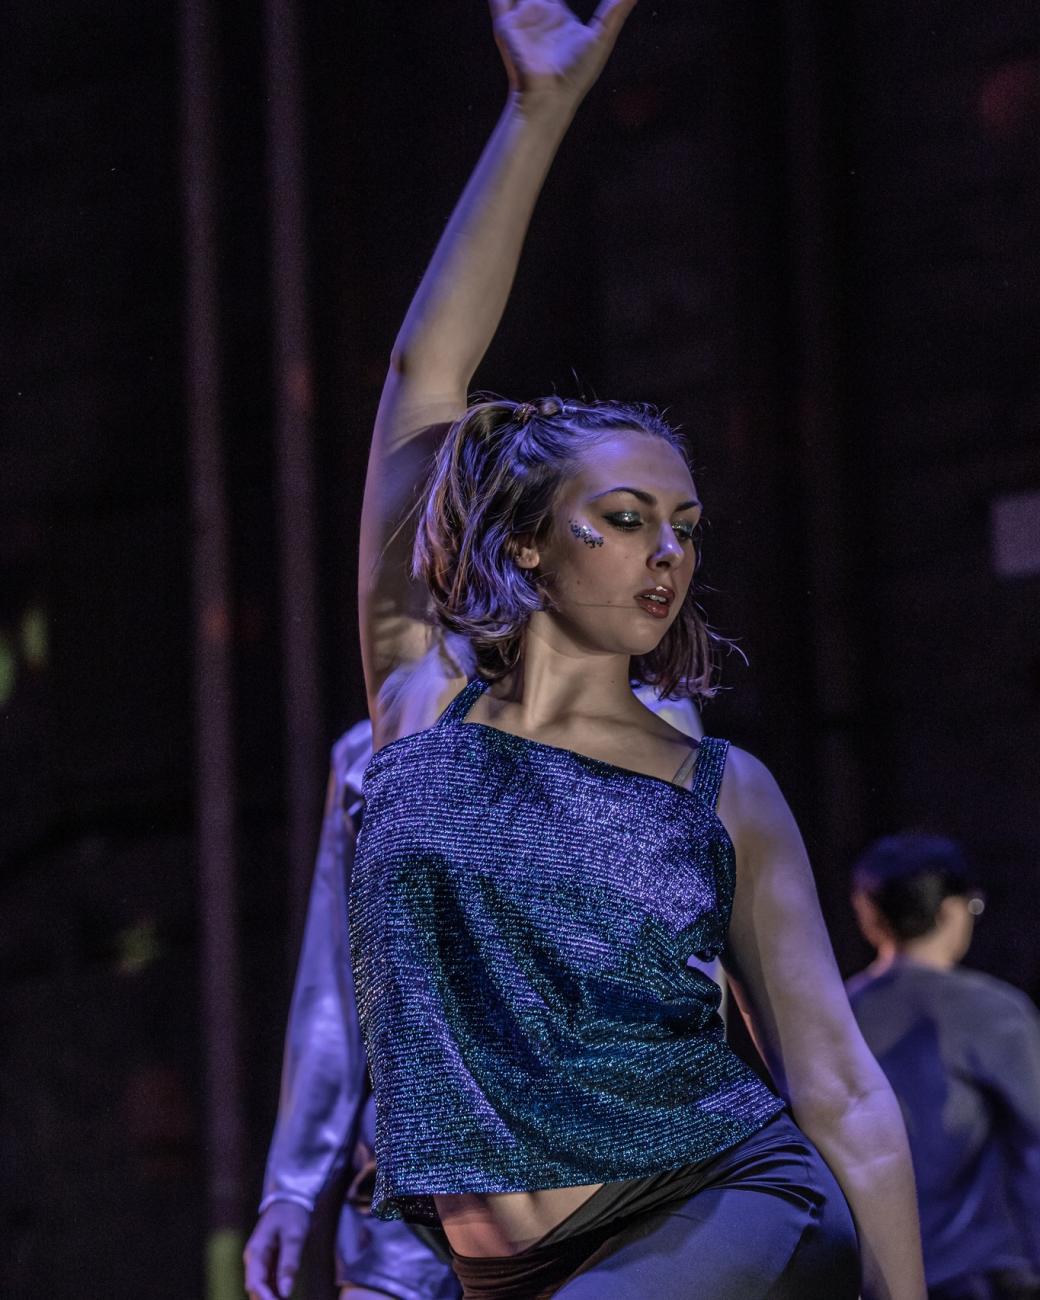 a dancer tossing her right arm in the air like she is grooving at a supa cool techno club, wearing a shiny blue metallic halter top and eyeshadow that just won't STOP glimmering under the lights